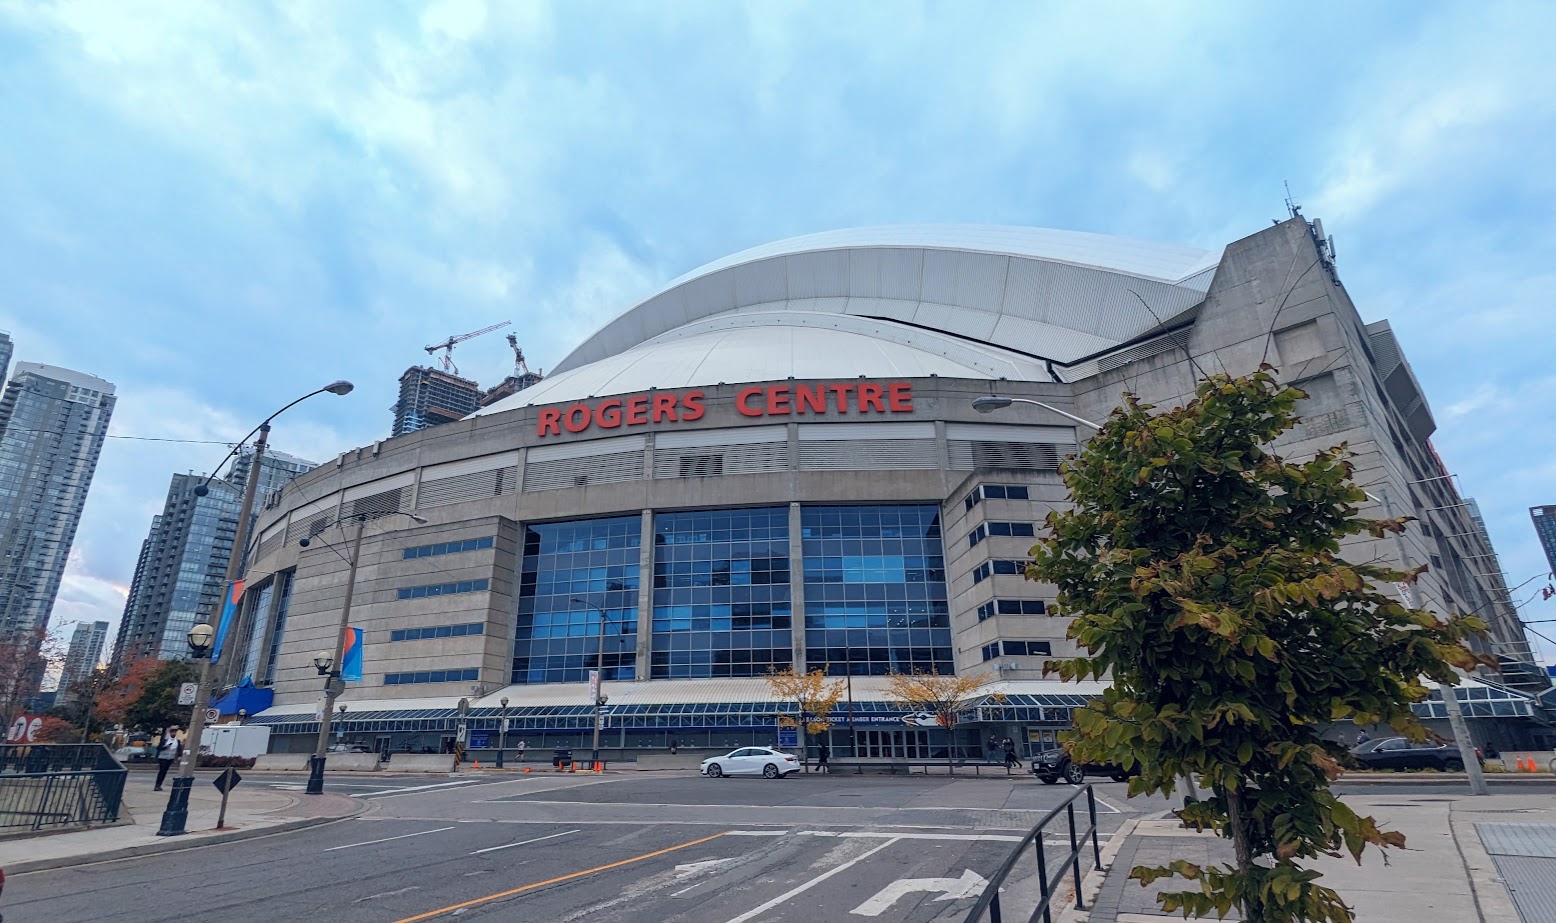 A street view of the Rogers Centre, a multi-purpose stadium located in Toronto, Canada.